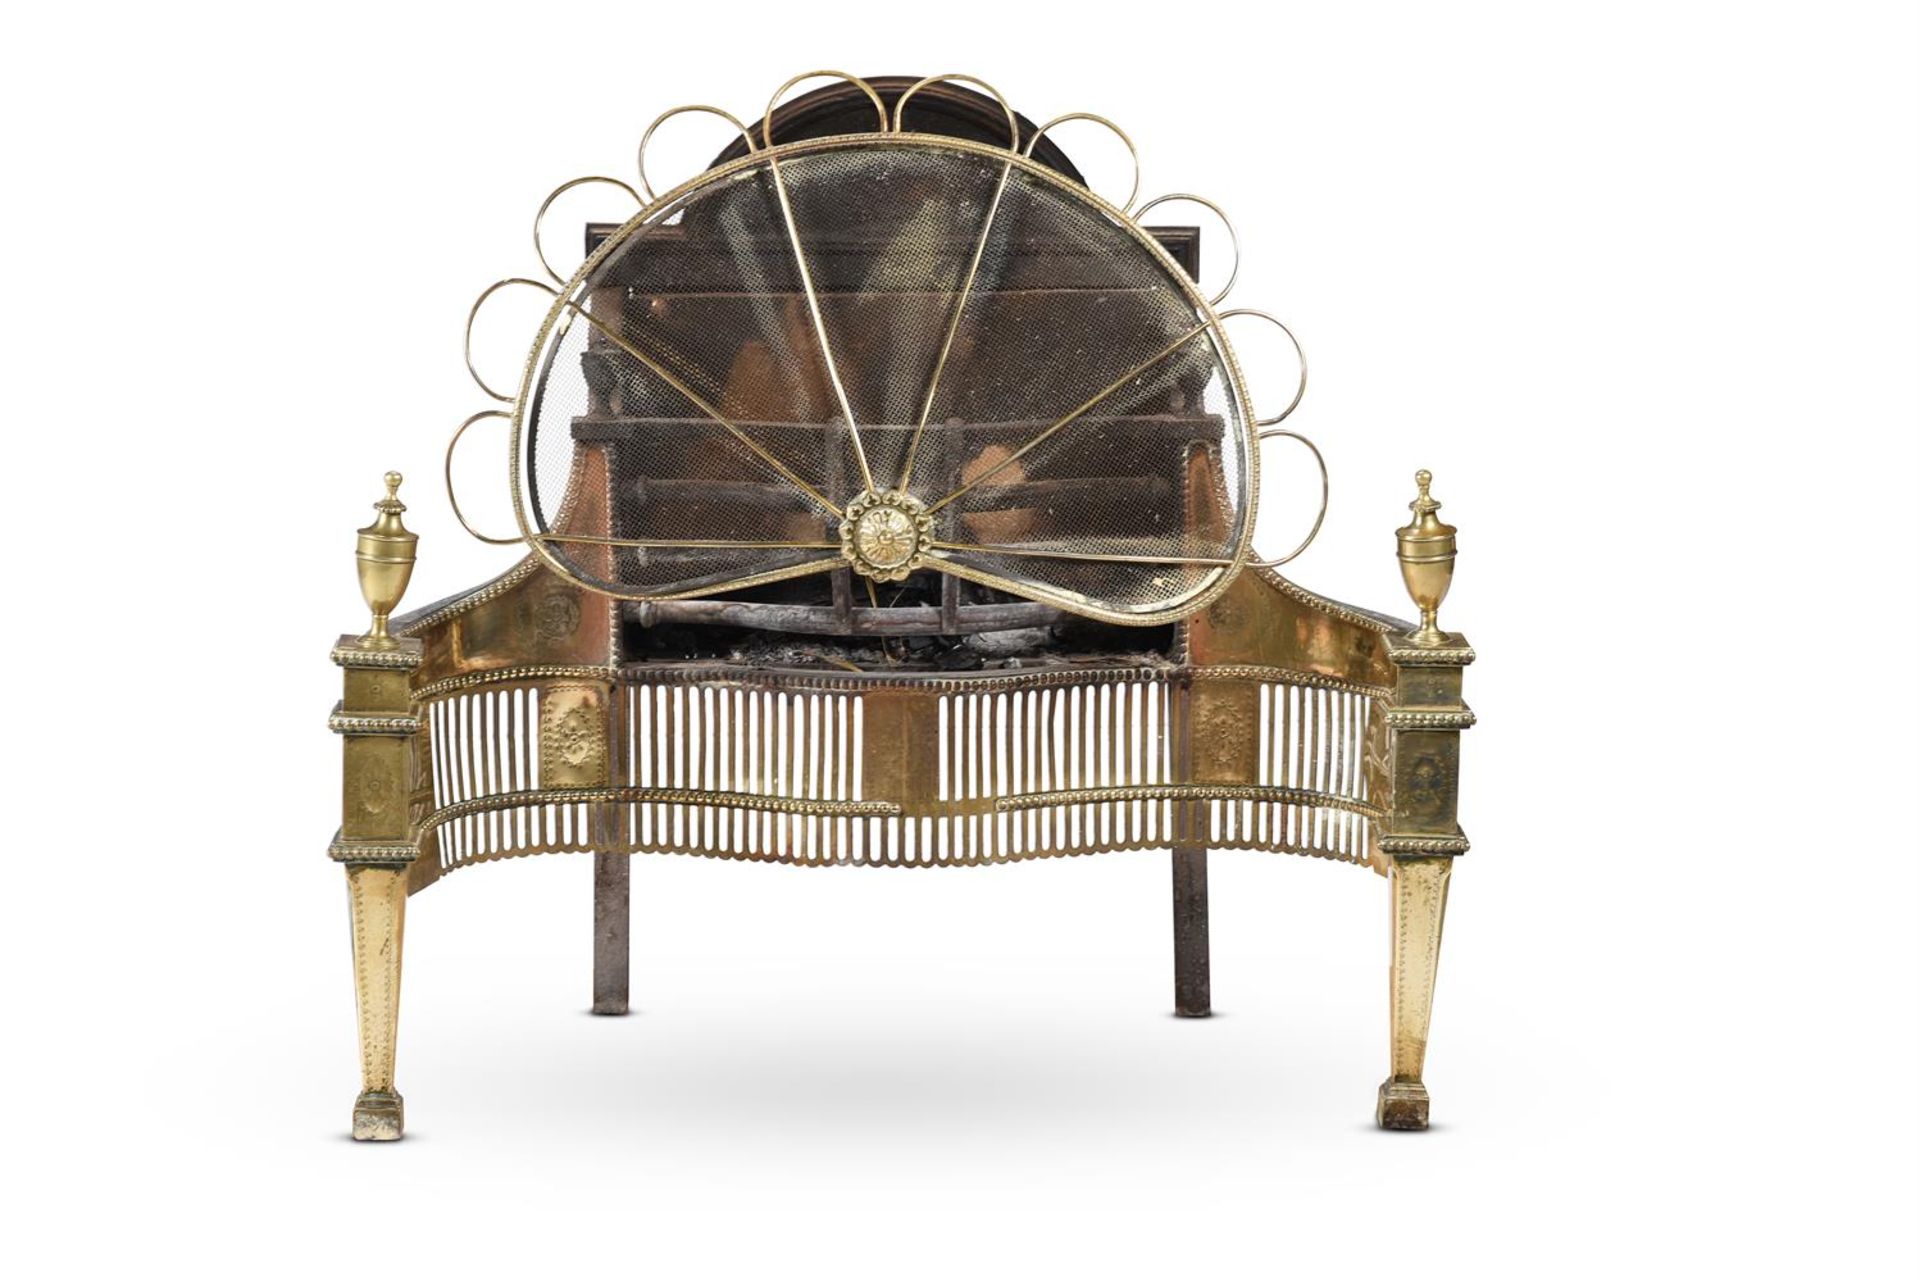 A GEORGE III FIRE GRATE, CIRCA 1800 AND LATER